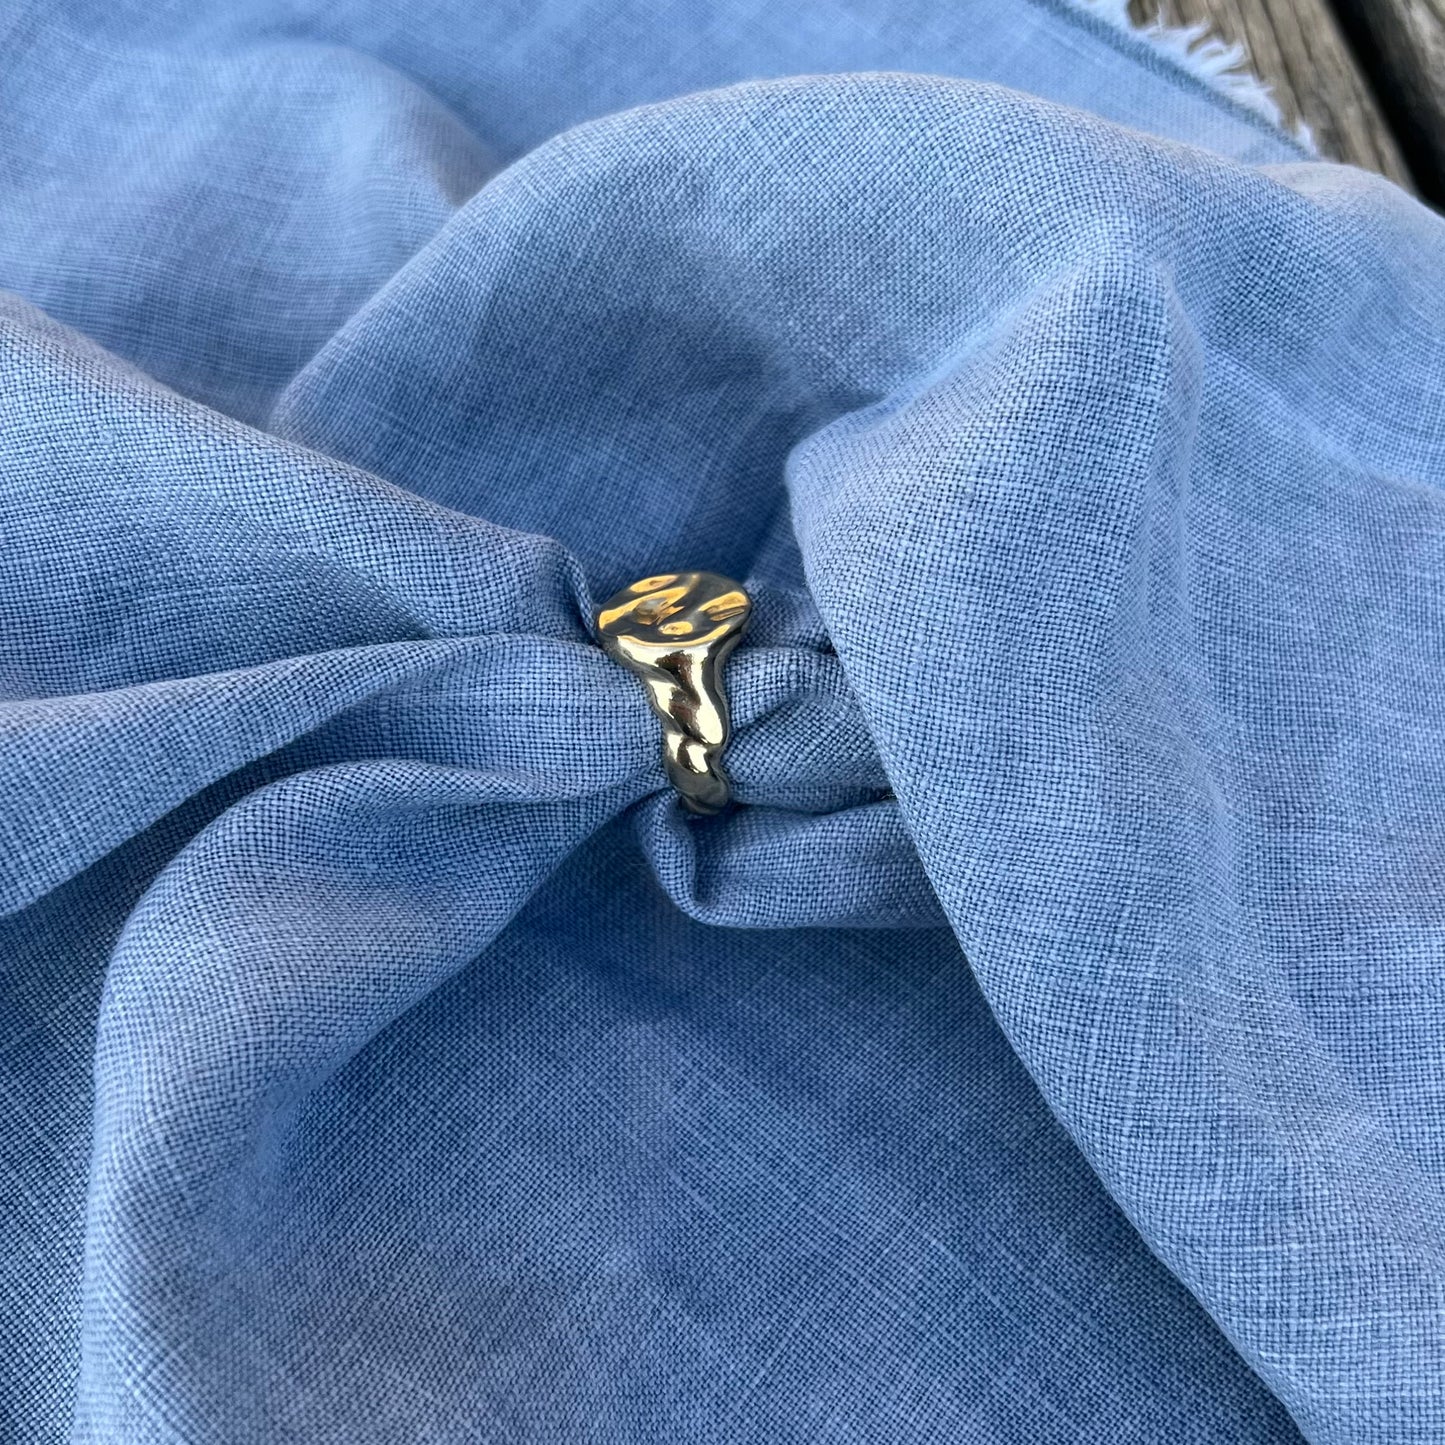 A 9ct yellow gold splash ring on a background of blue linen.